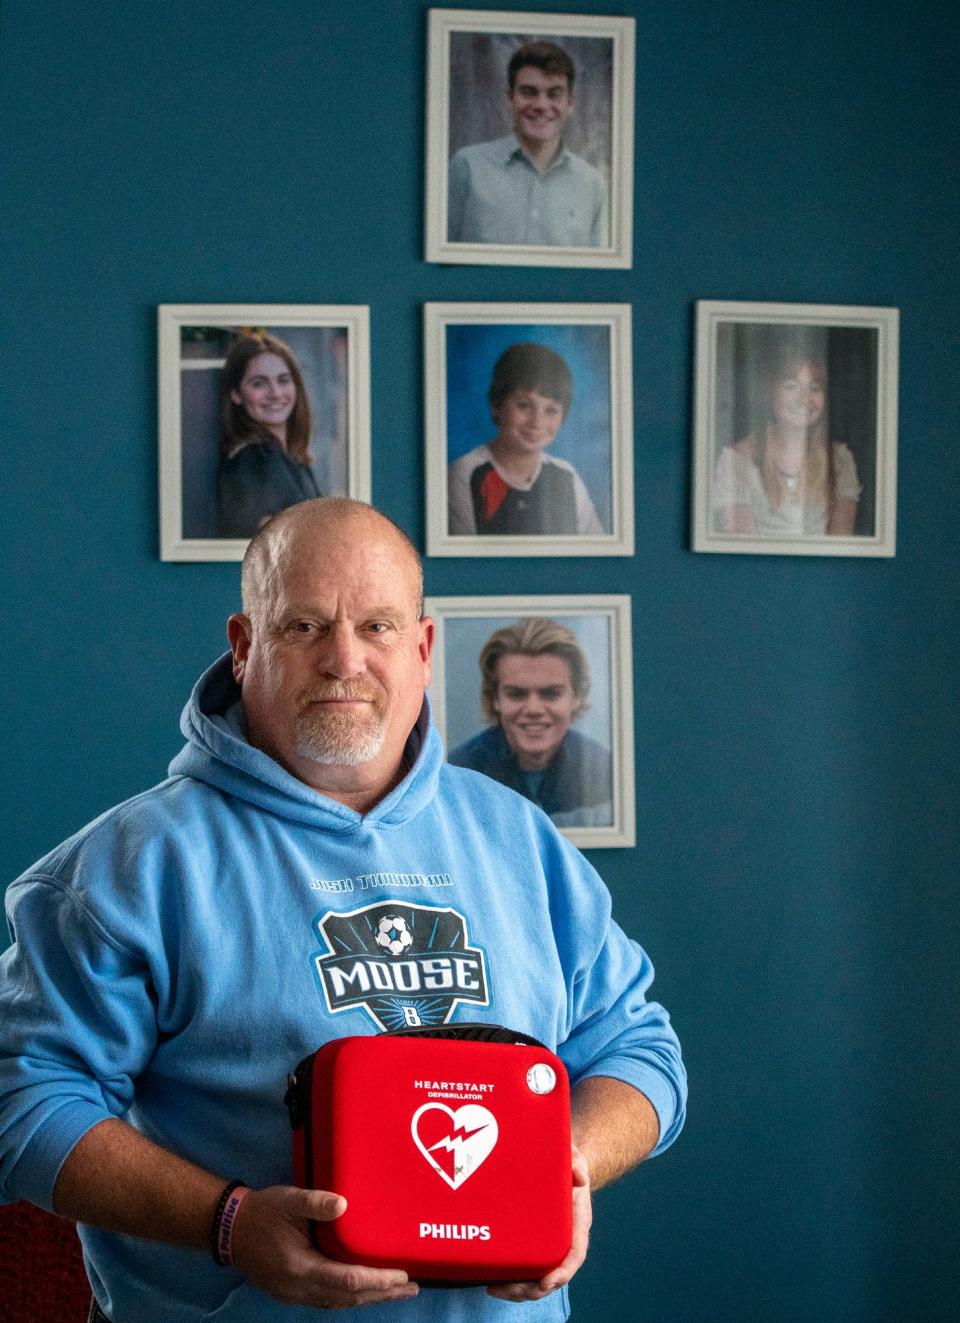 Ralph Thibodeau holds a defibrillator by photos of his children, including Josh in the middle, Tuesday at his Holden home. Josh was 12 years old when he died unexpectedly at a soccer camp in 2011.